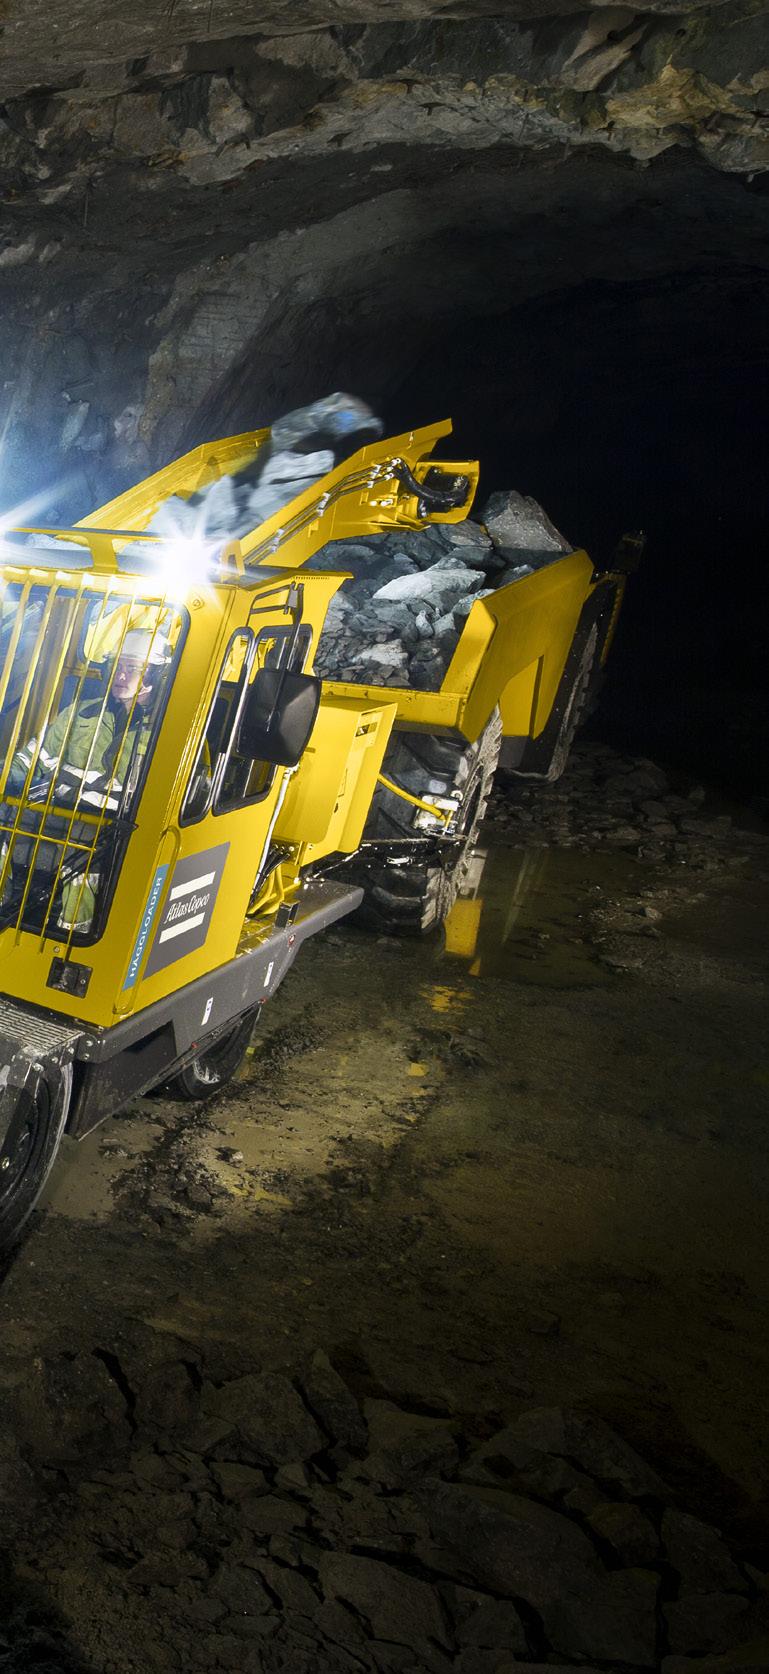 Hybrid Häggloader 7HR & 7HR-B Loading capacity up to 3.5 m³/min. Tunnel drift size from 8m². Rubber tired, four-wheel drive with independent front and rear axle steering. Hydrostatic drive train.